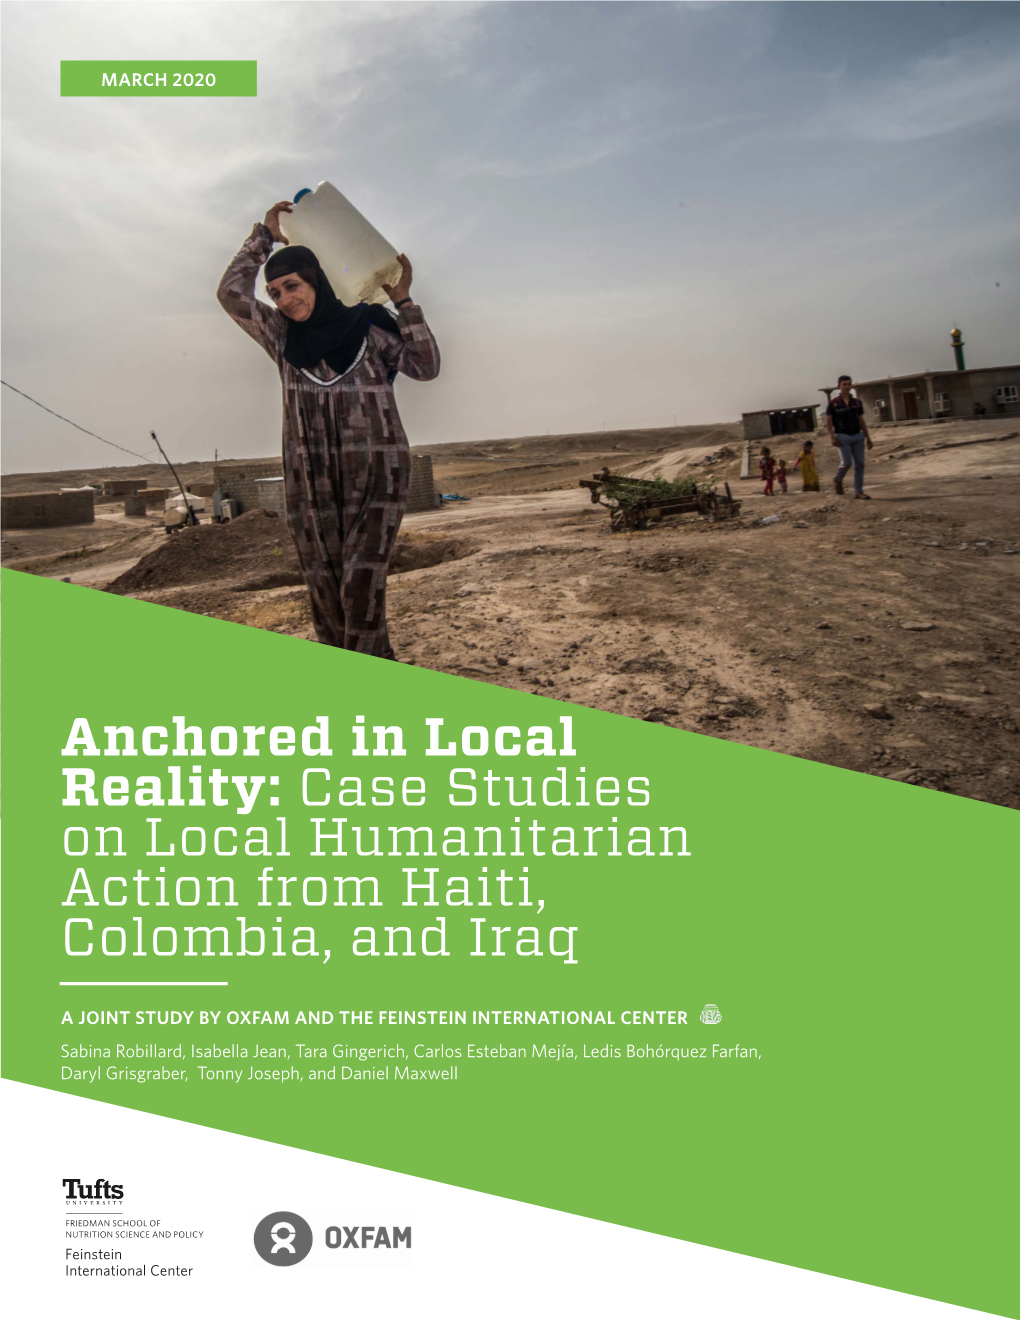 Case Studies on Local Humanitarian Action from Haiti, Colombia, and Iraq